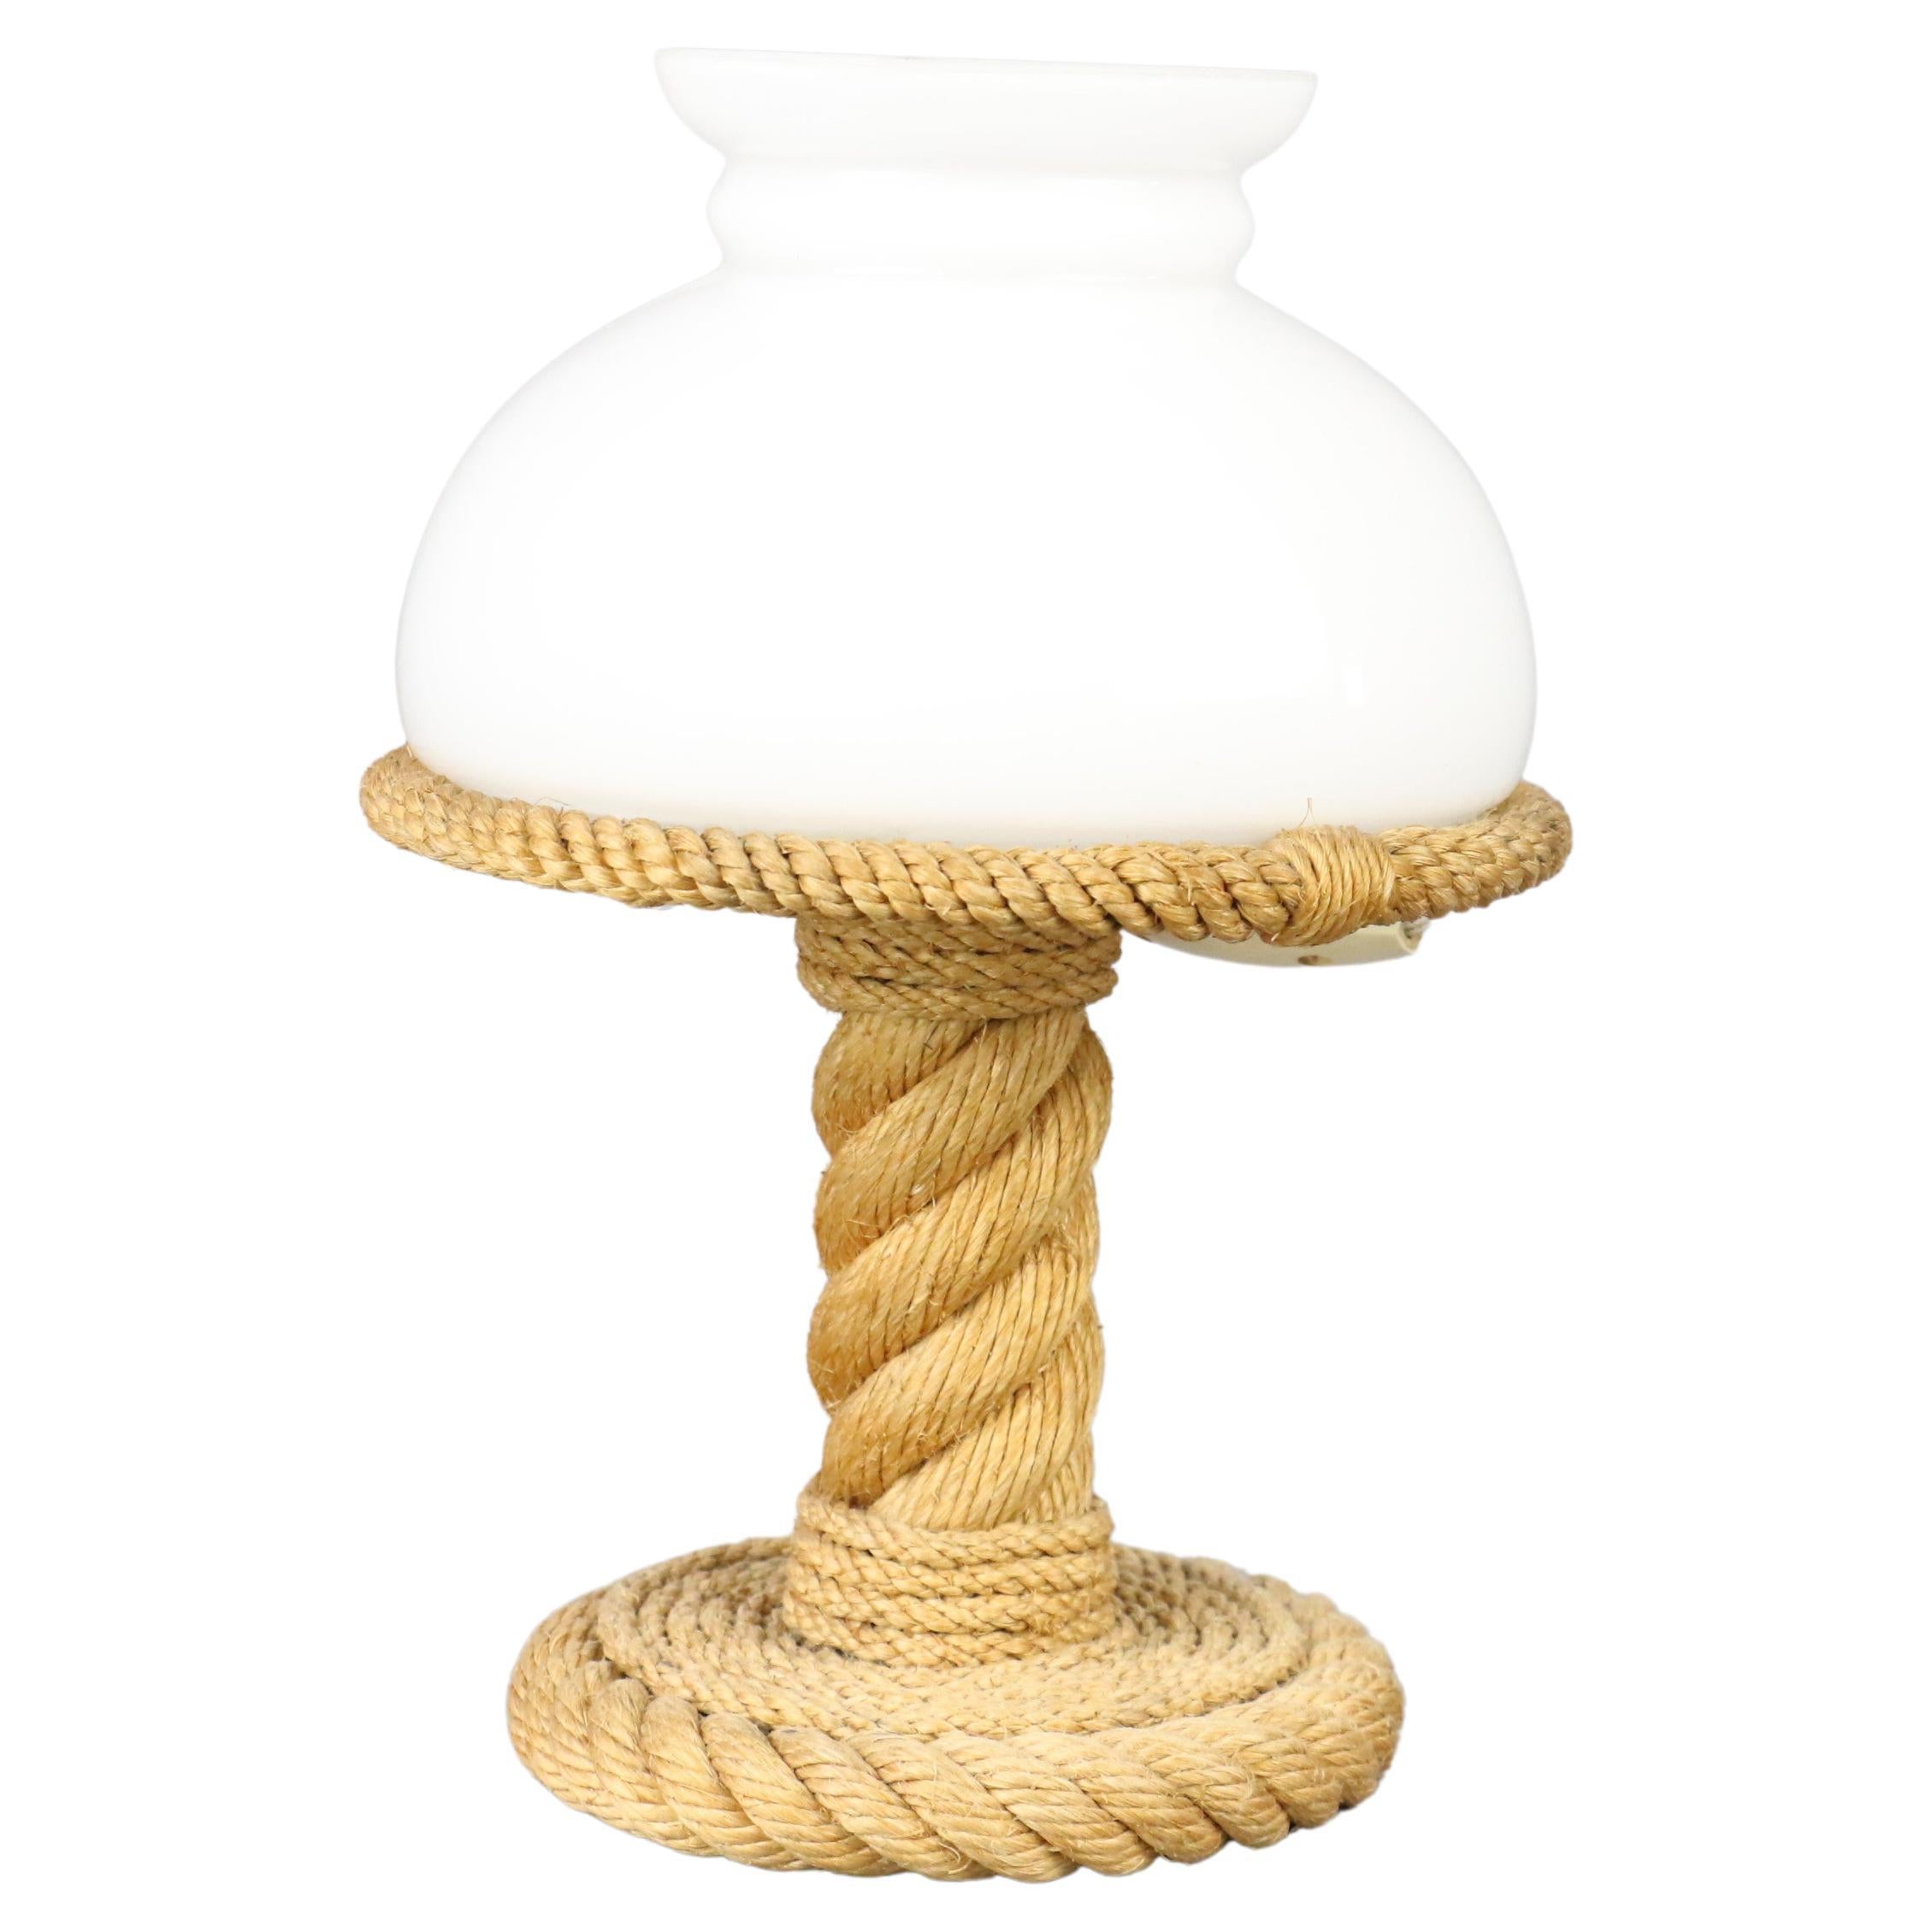 Midcentury Rope and Opaline Lamp by Adrien Audoux and Frida Minet, circa 1960

Rare lamp by the French and Swiss designers Adrien Audoux and Frida Minet. This model is really rare. 
The light produced by this lamp is very warm. This makes it a